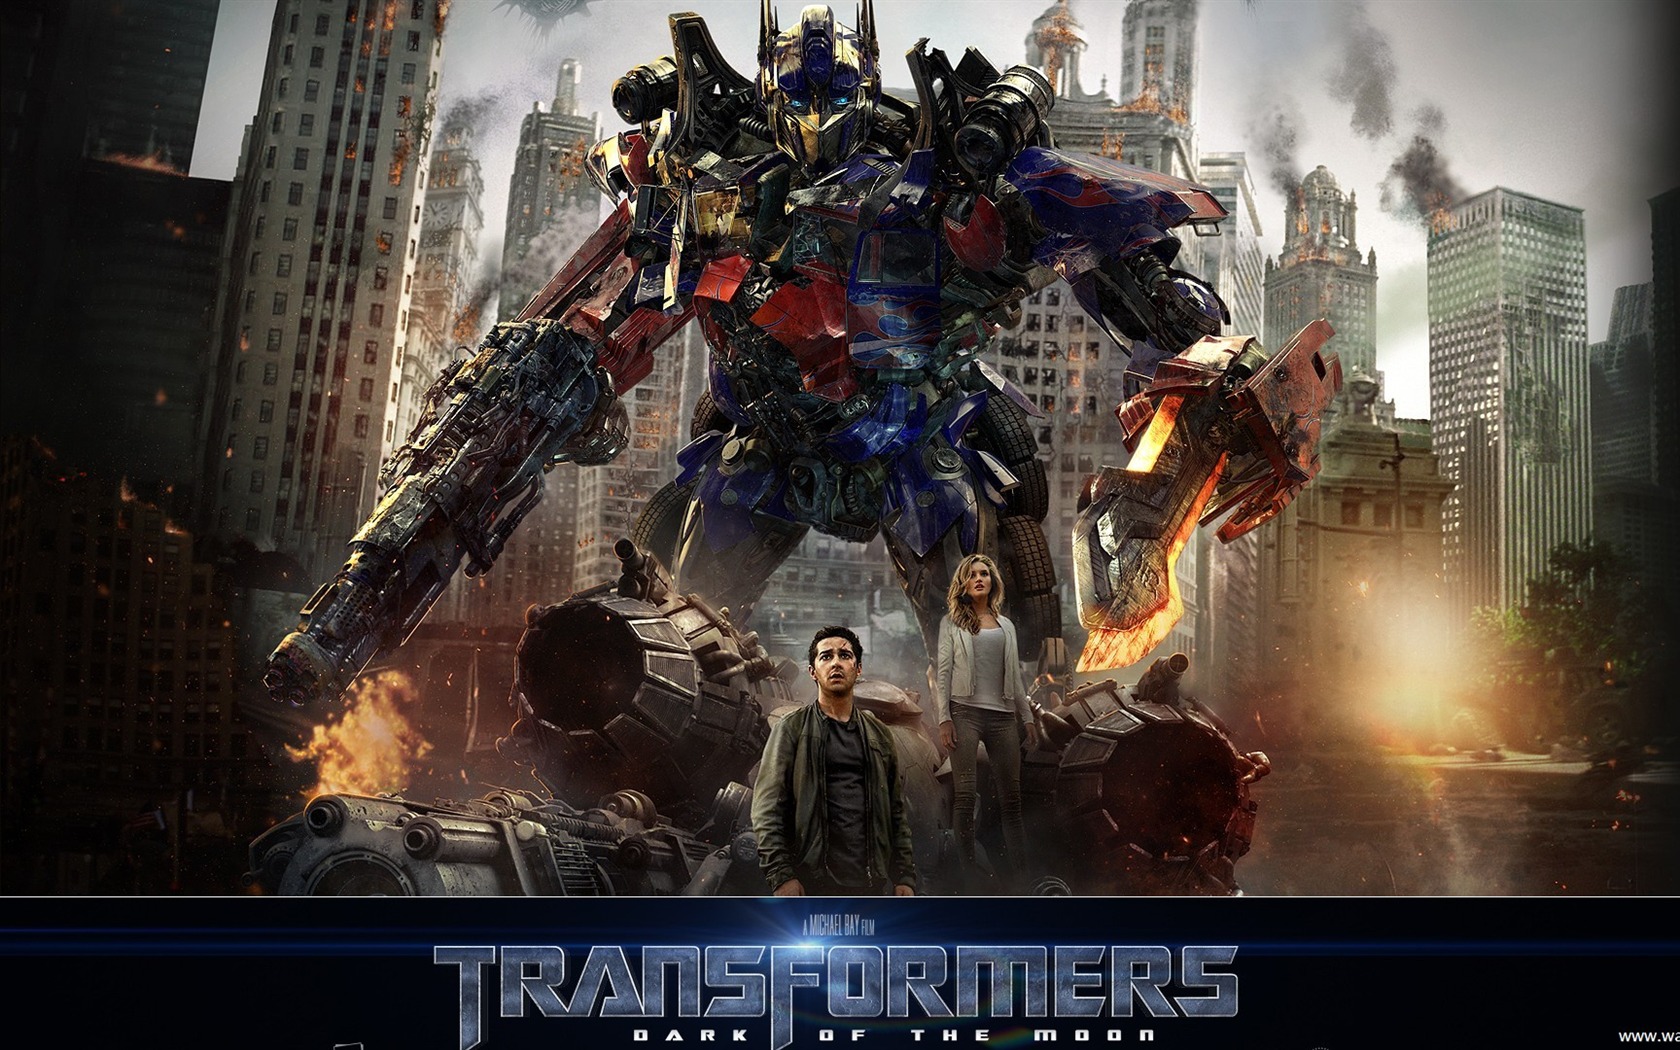 Transformers 3 Dark of the Moon HD Movie Wallpapers 04 - 1680x1050